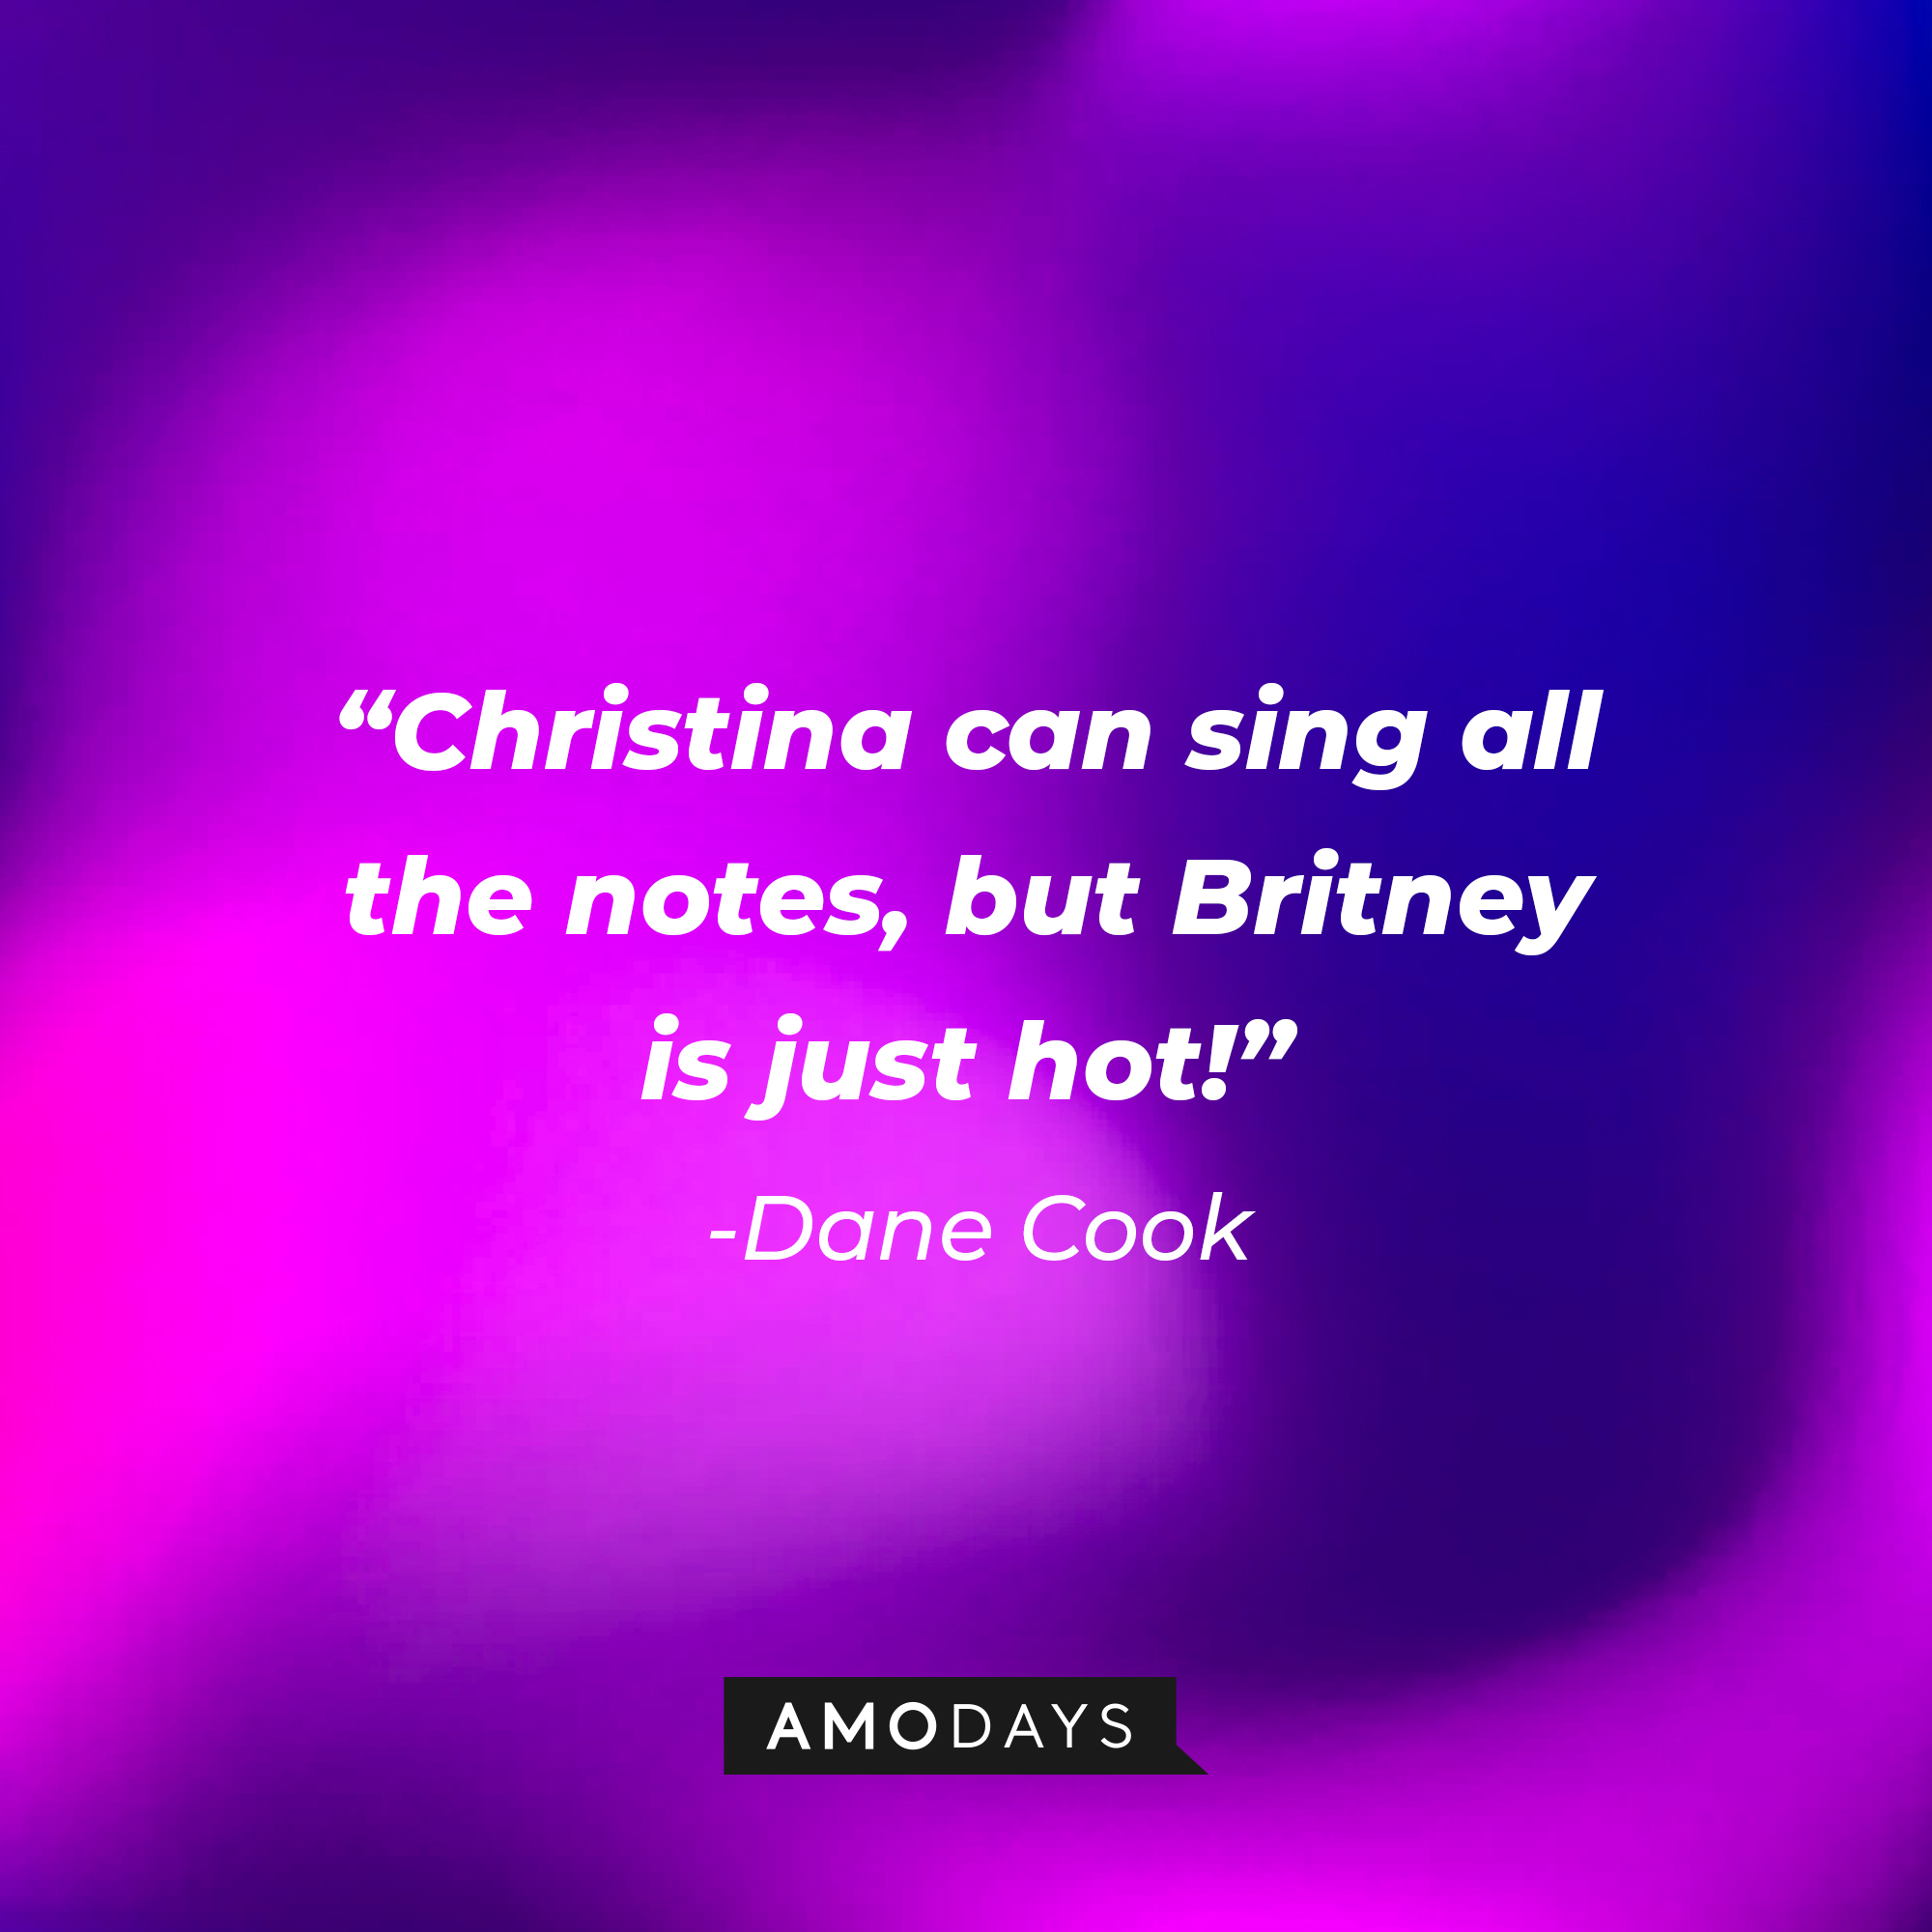 Dane Cook's quote: "Christina can sing all the notes, but Britney is just hot!” | Source: Amodays